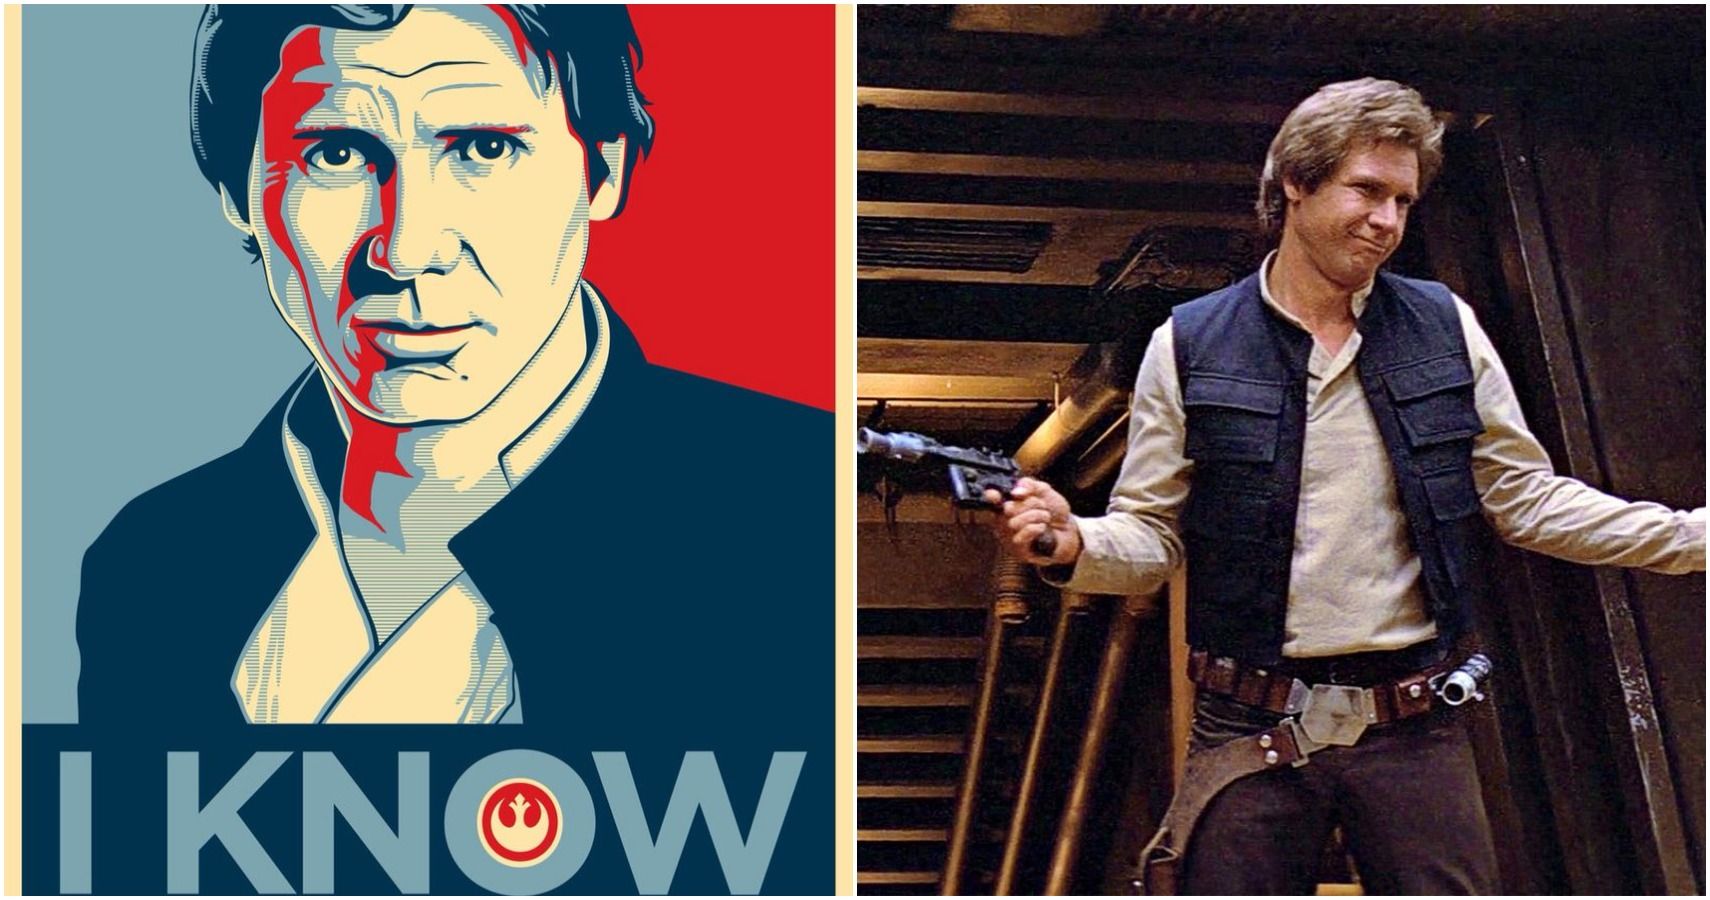 10 Han Solo "I Know" Memes That We Know You'll Love ...